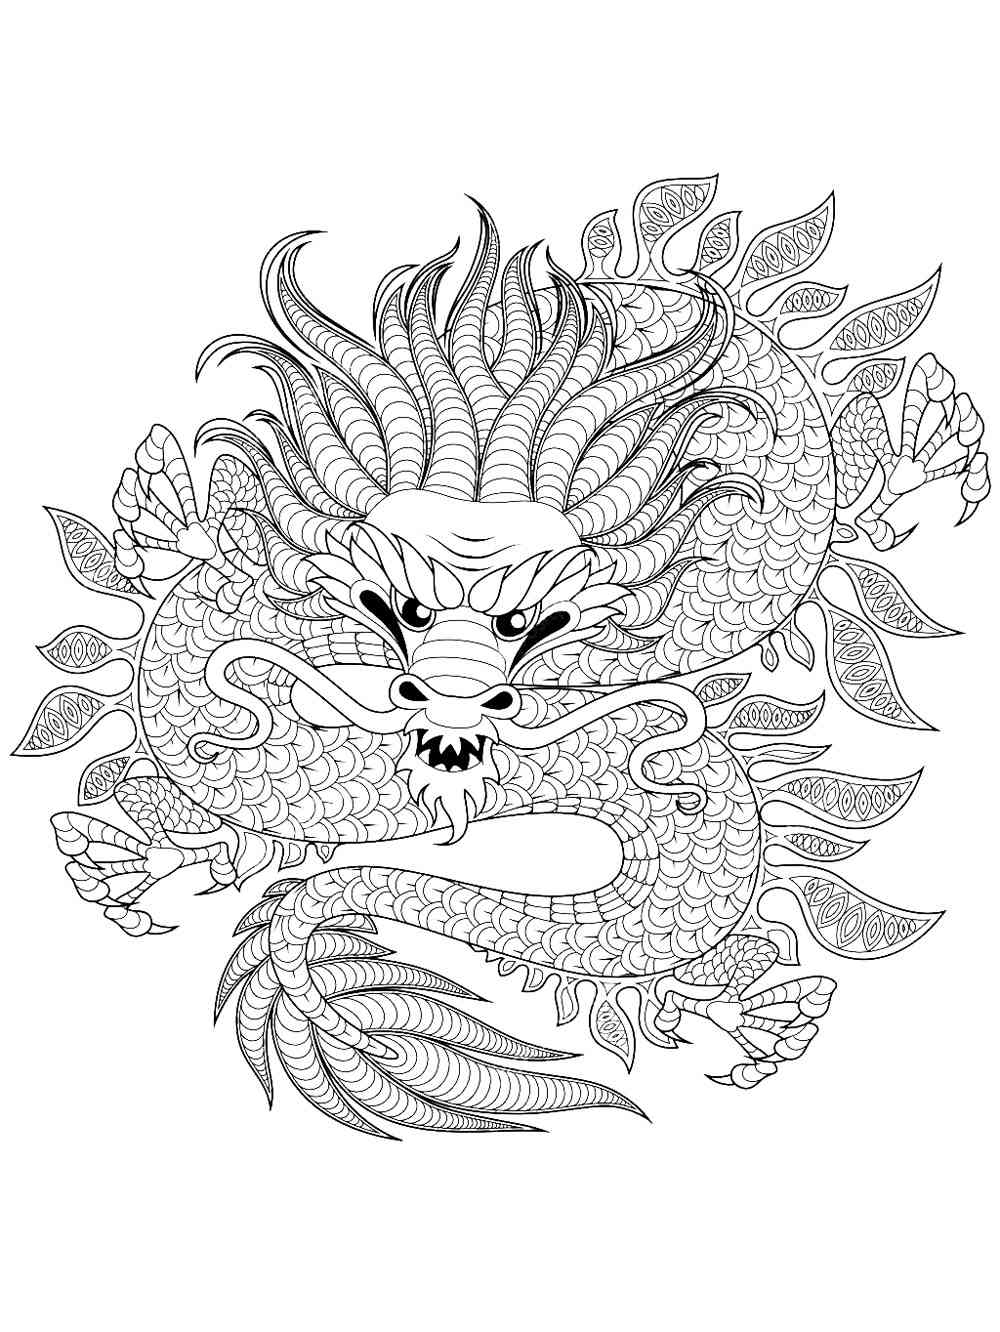 Chinese Dragon coloring page for Adult